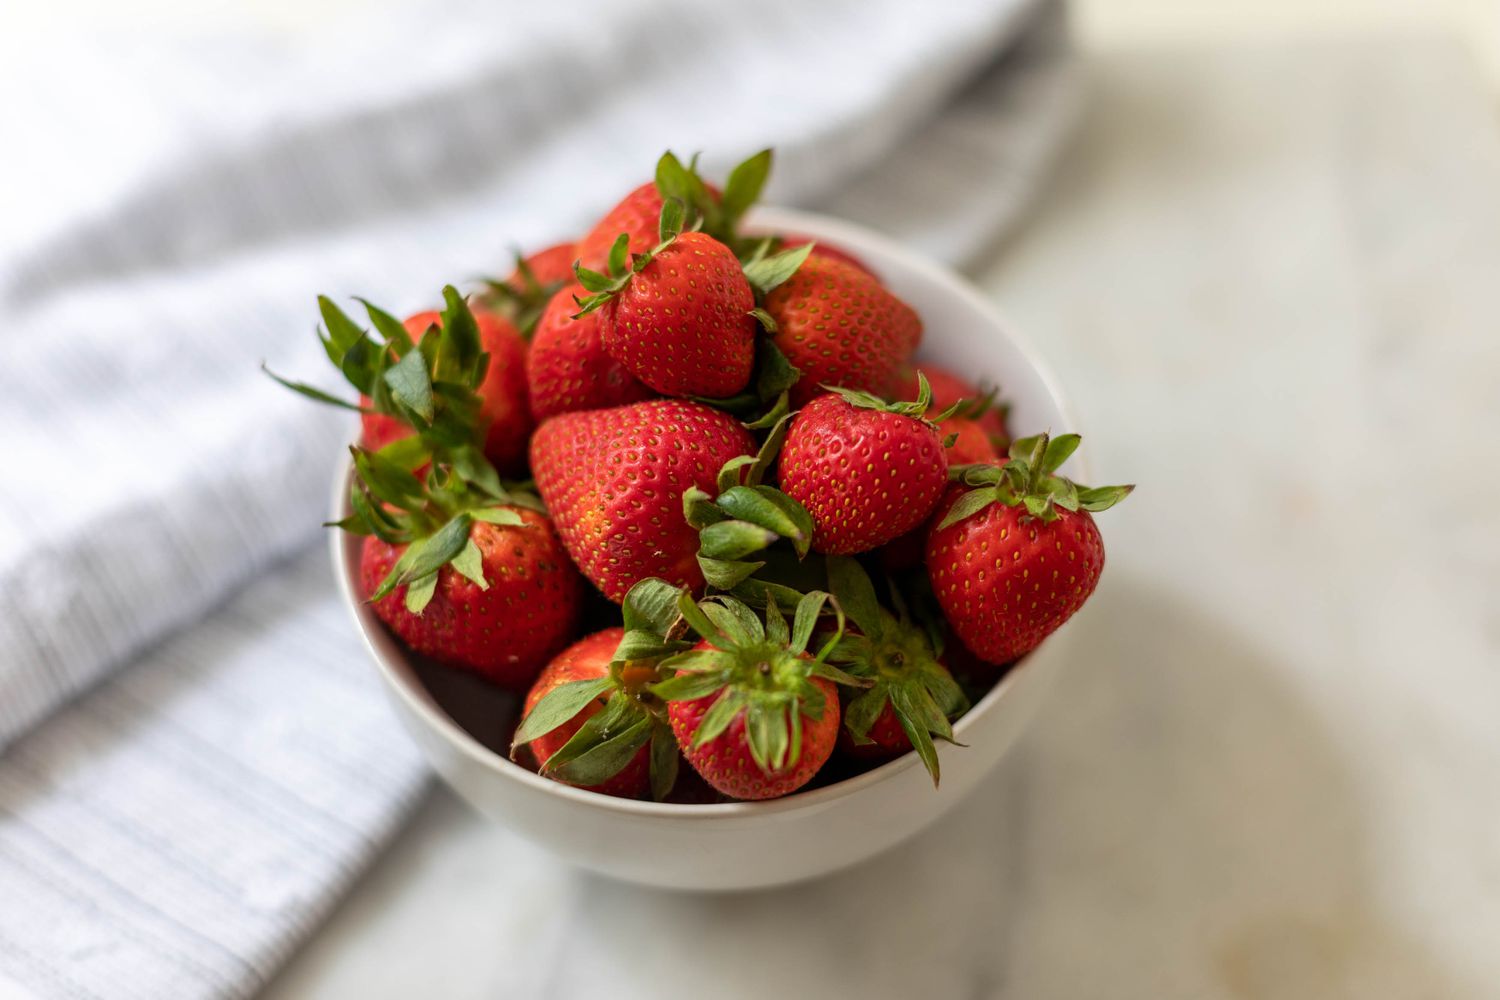 Red strawberries in a small white bowl